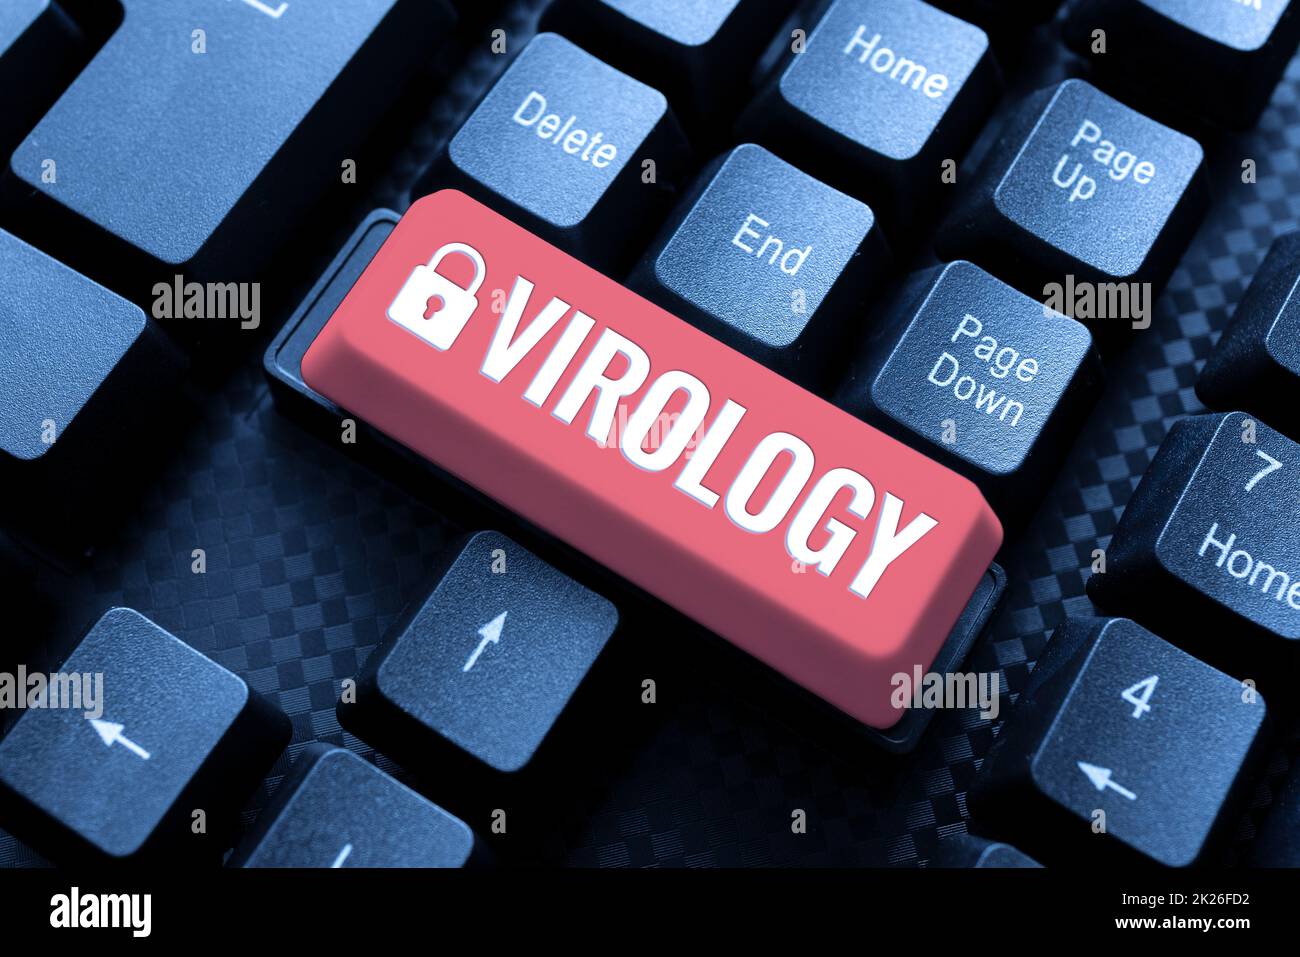 Conceptual display Virology. Business approach branch of science dealing with the variety of viral agents and disease Abstract Creating Safe Internet Experience, Preventing Digital Virus Spread Stock Photo